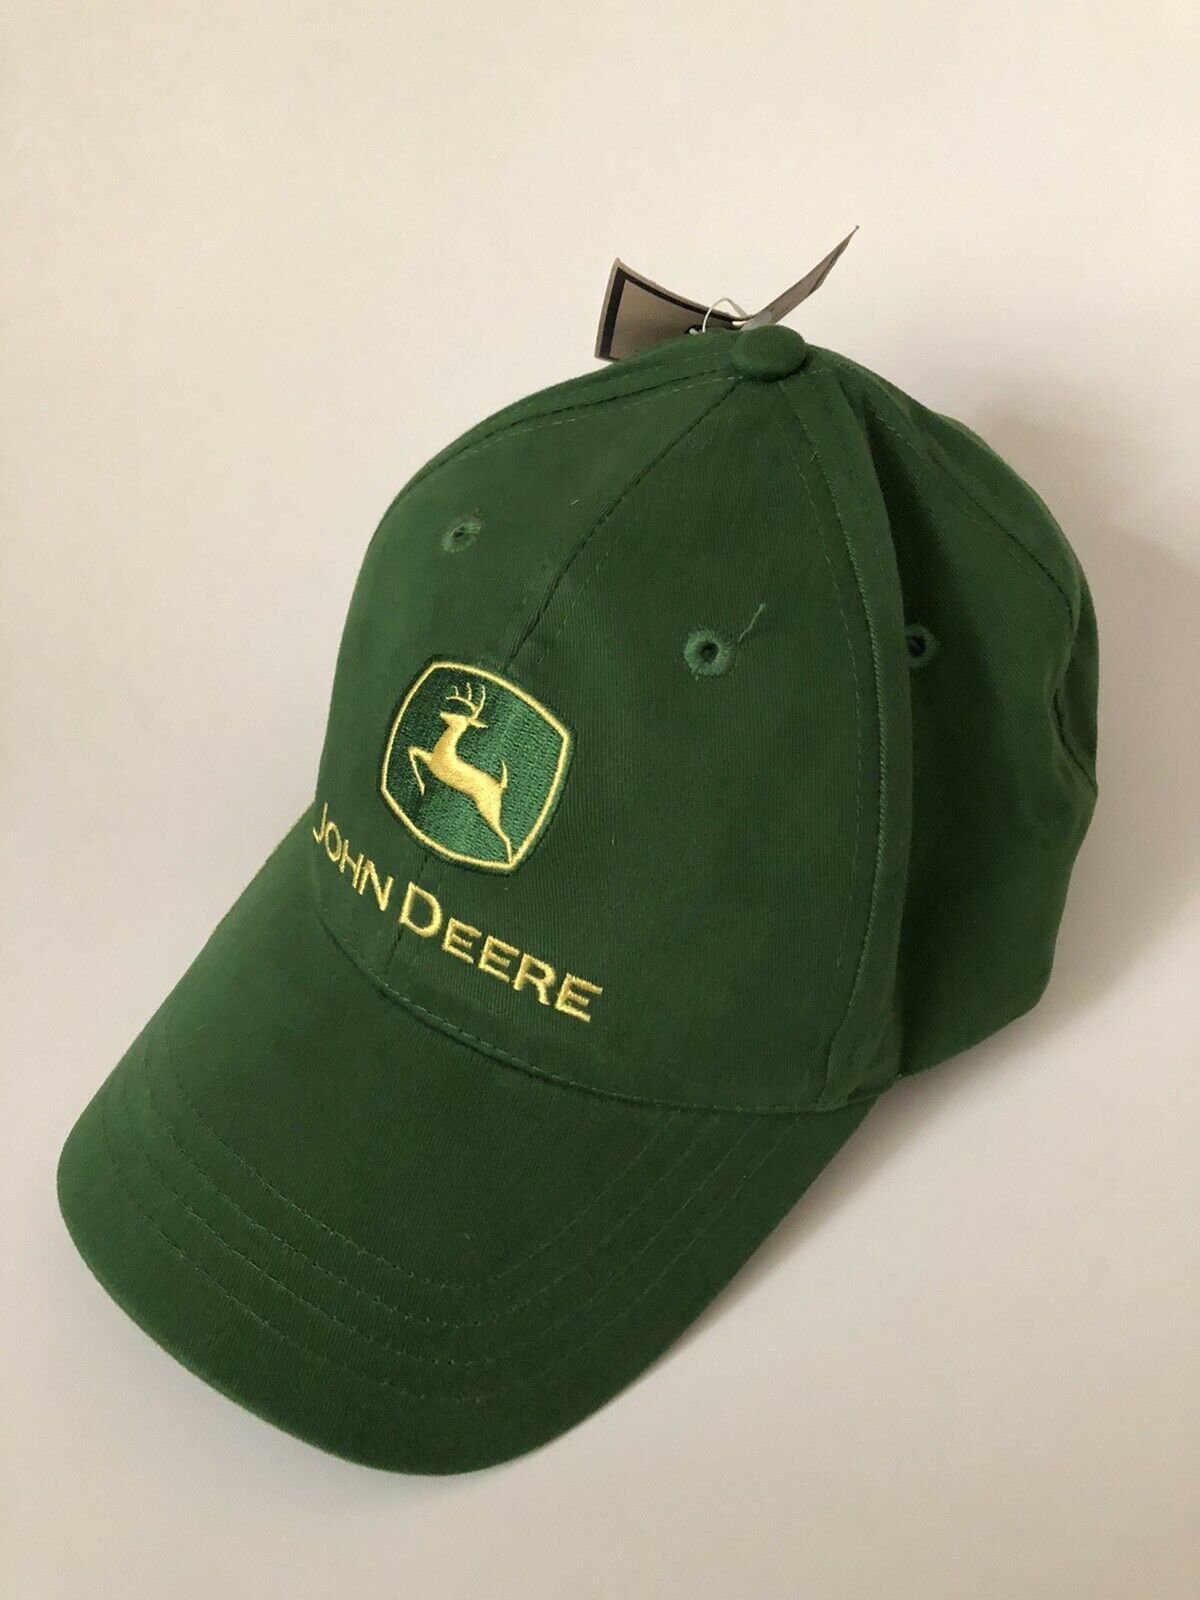 John Deere Tractors Hat Adjustable One Size Owner’s Edition Cary Francis Group - $11.64